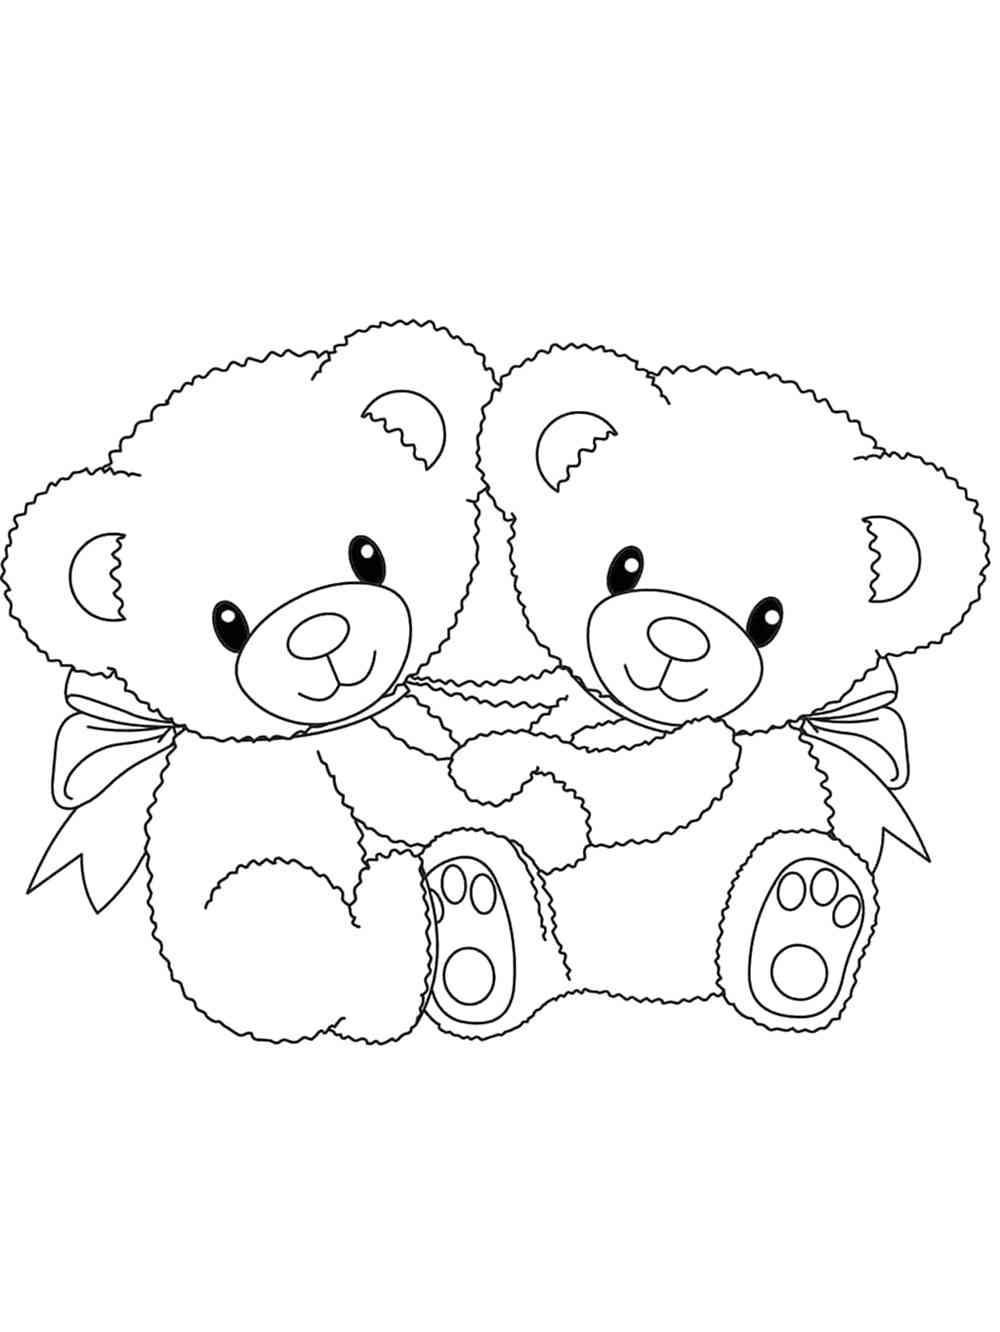 Teddy Bears coloring pages